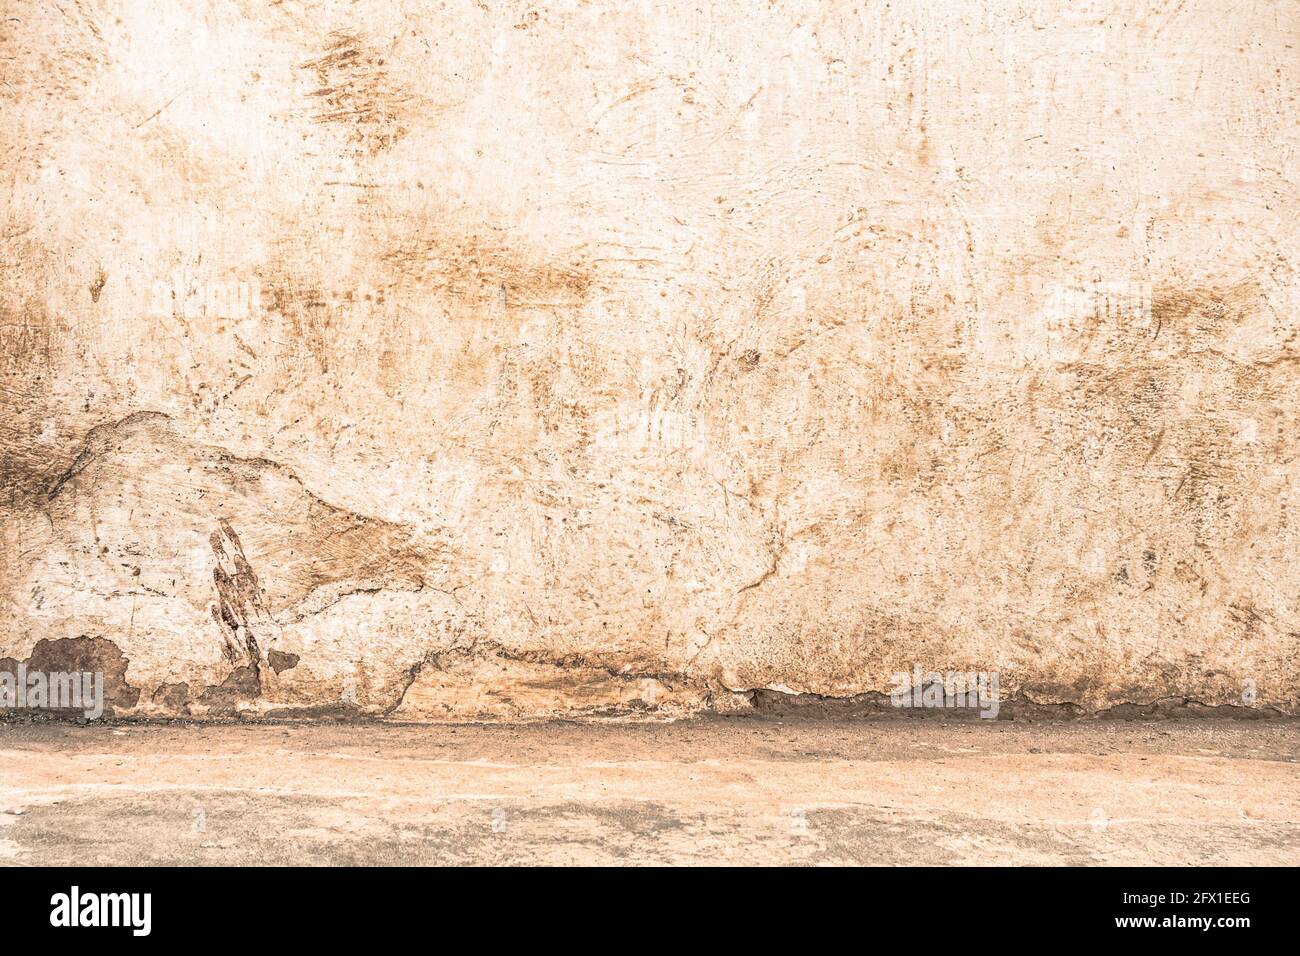 Empty wall with floor edge - Dramatic background scene with cracked stonewall for prison building - Enhanced contrast crispy filtered editing Stock Photo